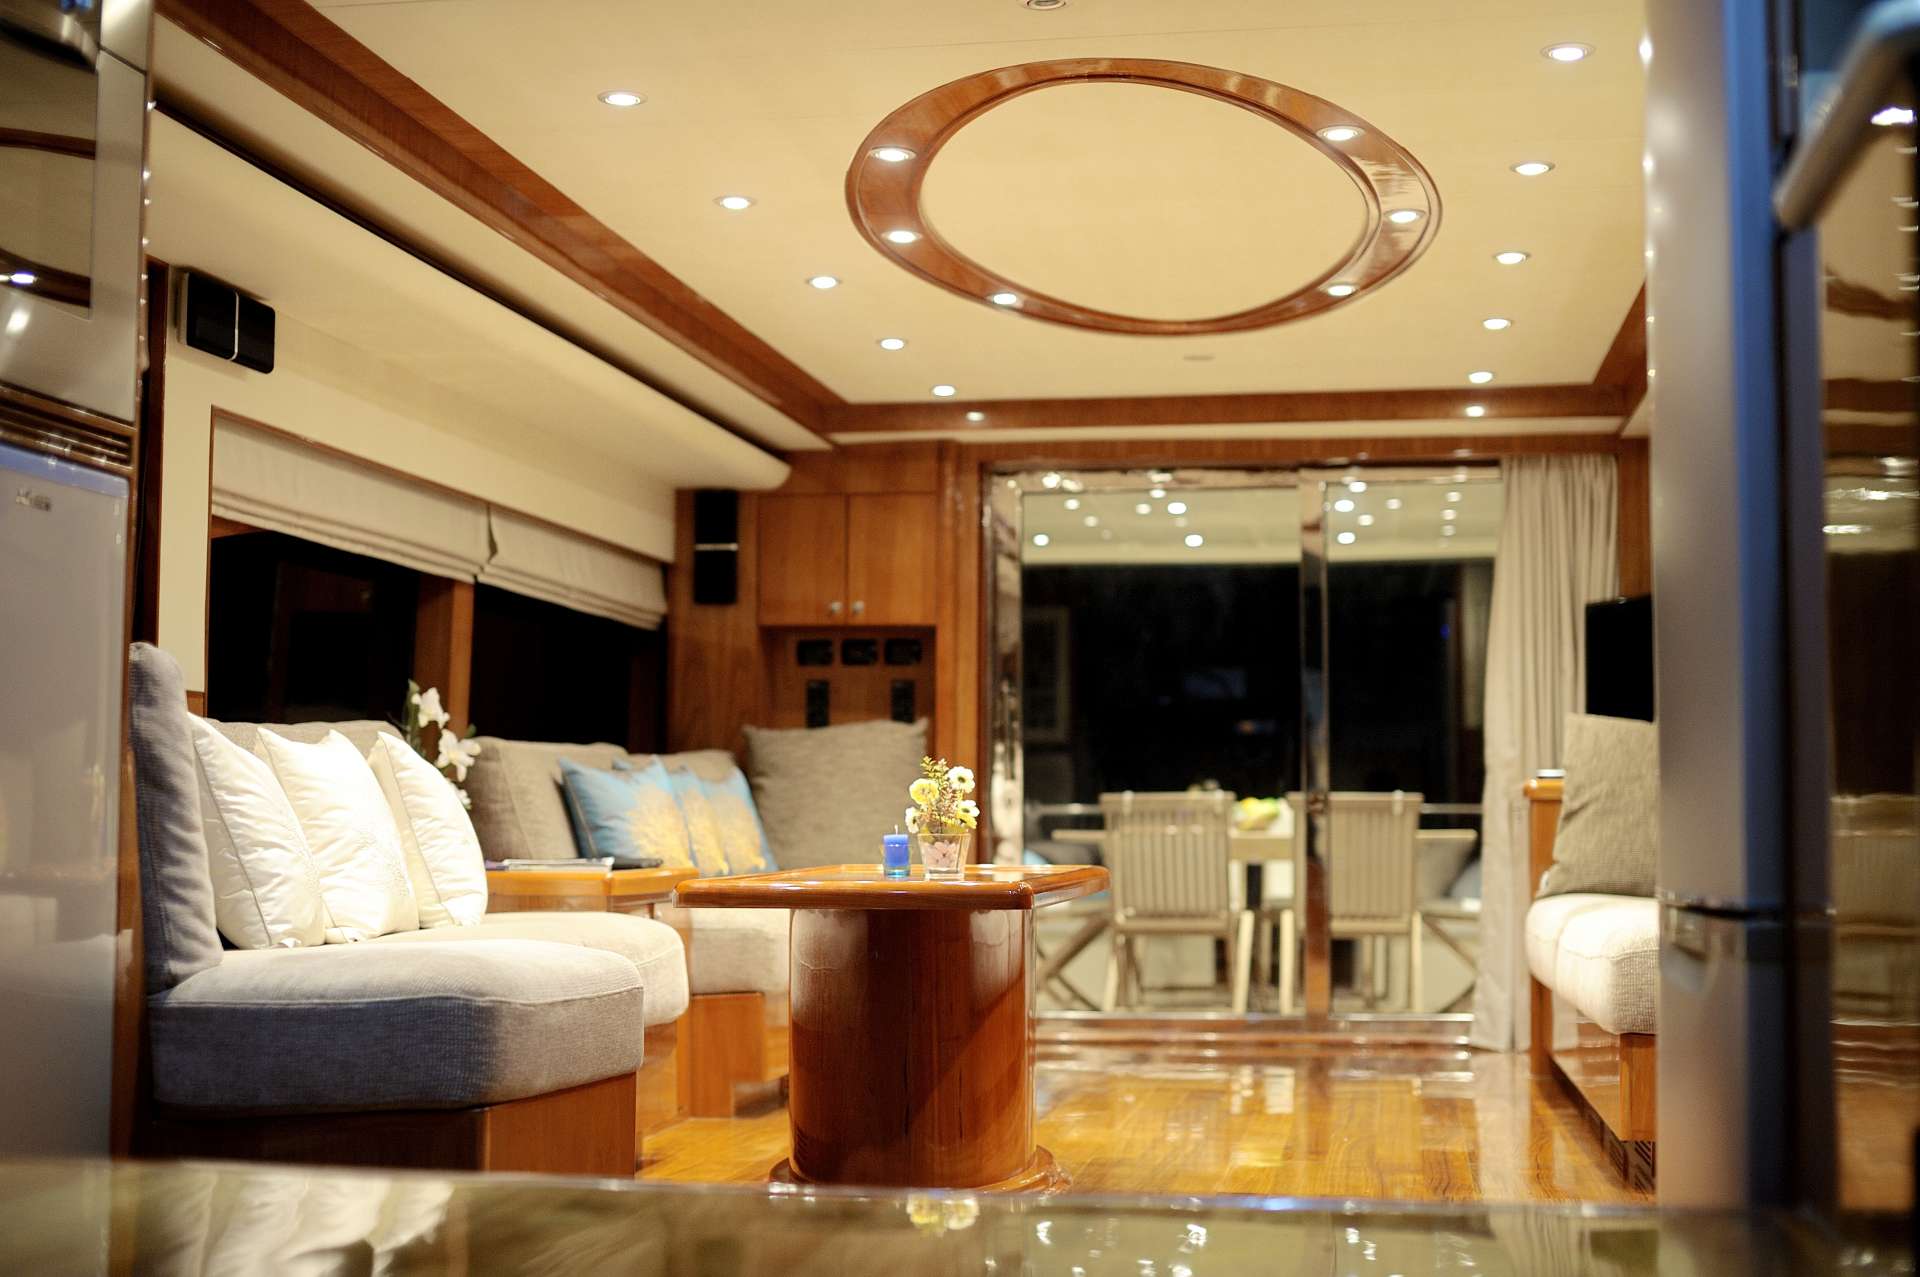 lady kathryn - Superyacht charter Thailand & Boat hire in SE Asia 2